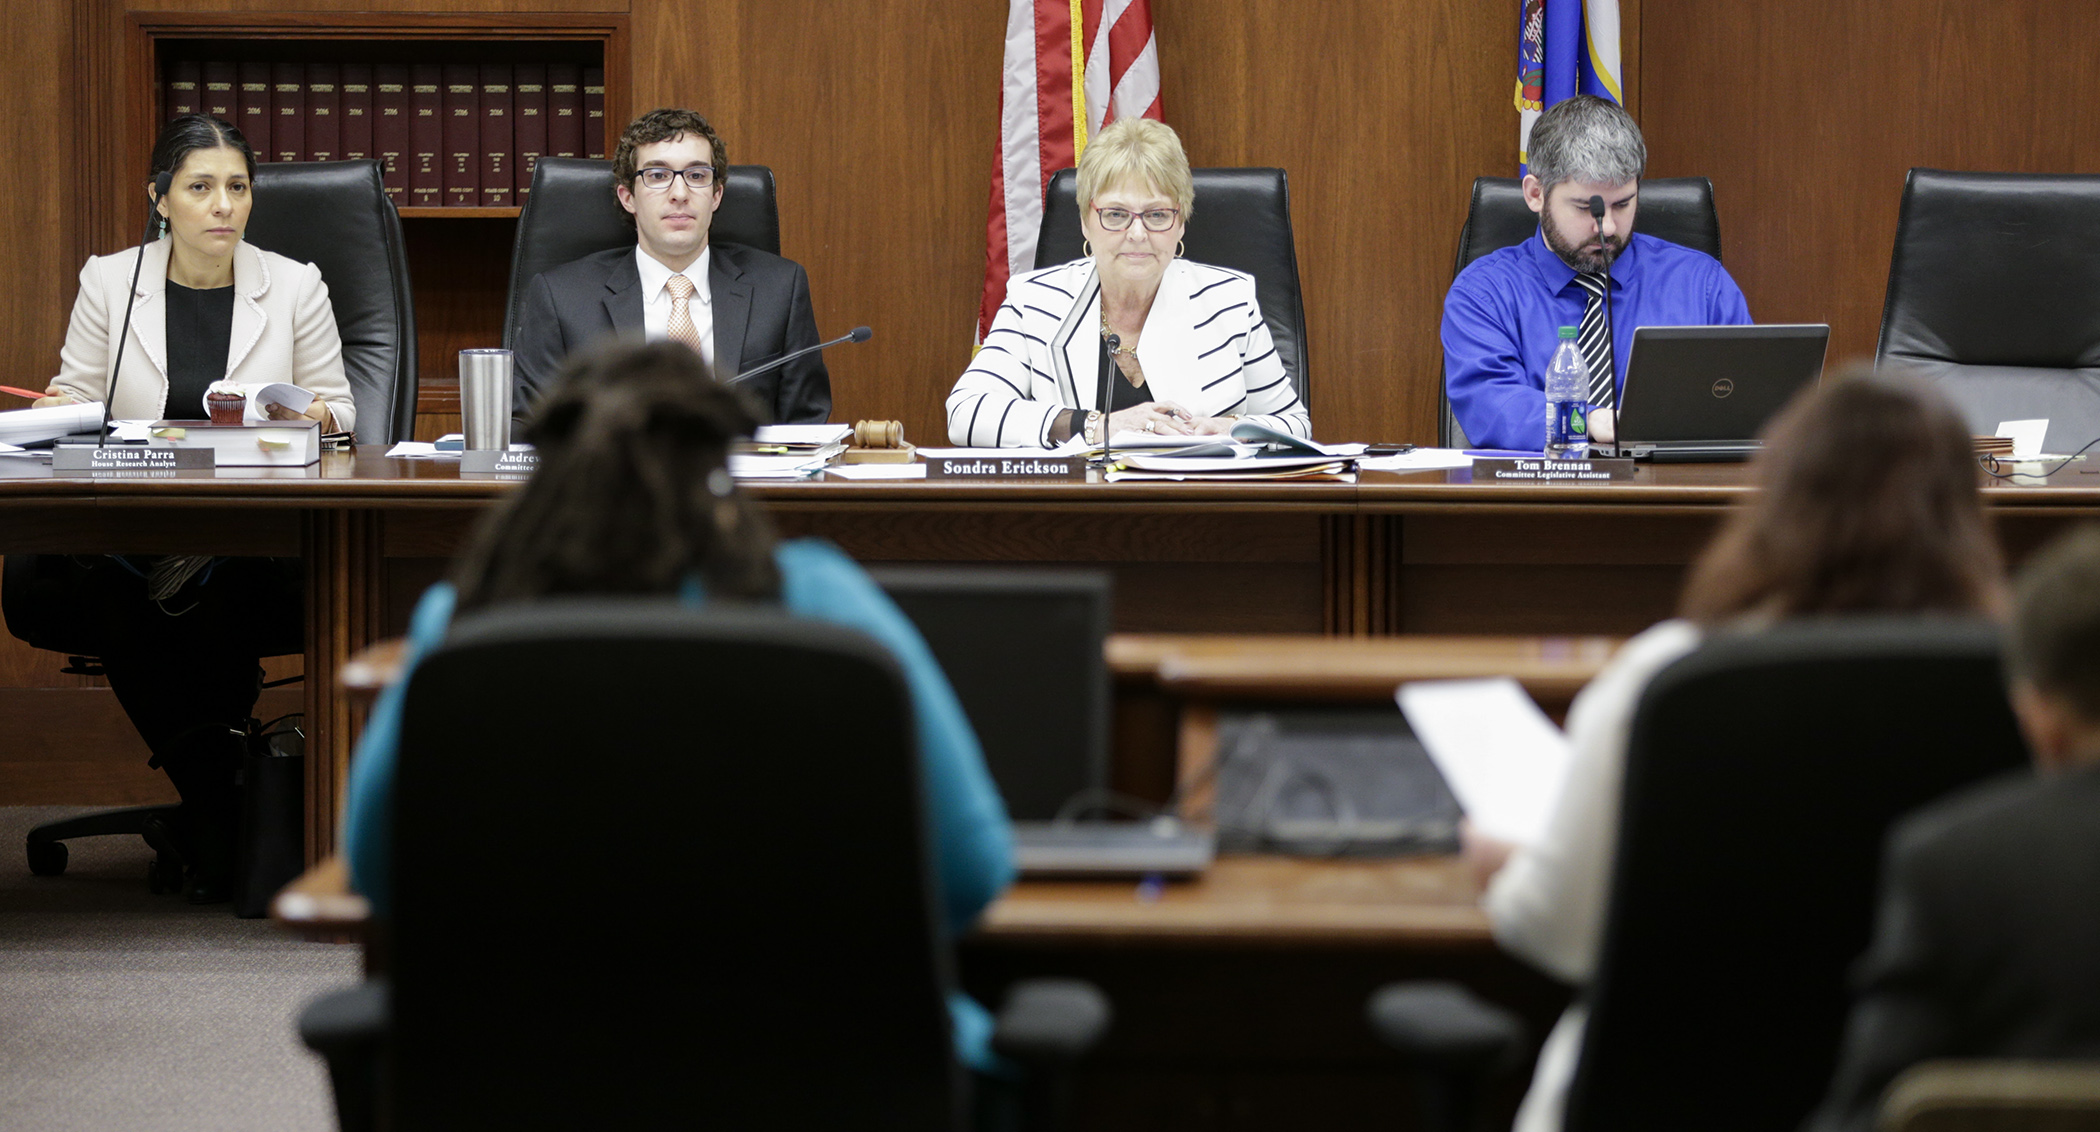 Rep. Sondra Erickson, chair of the House Education Innovation Policy Committee, listens to a witness testify on her bill, HF1663, which would, in part, modify alternative teacher preparation and compensation programs. Photo by Paul Battaglia